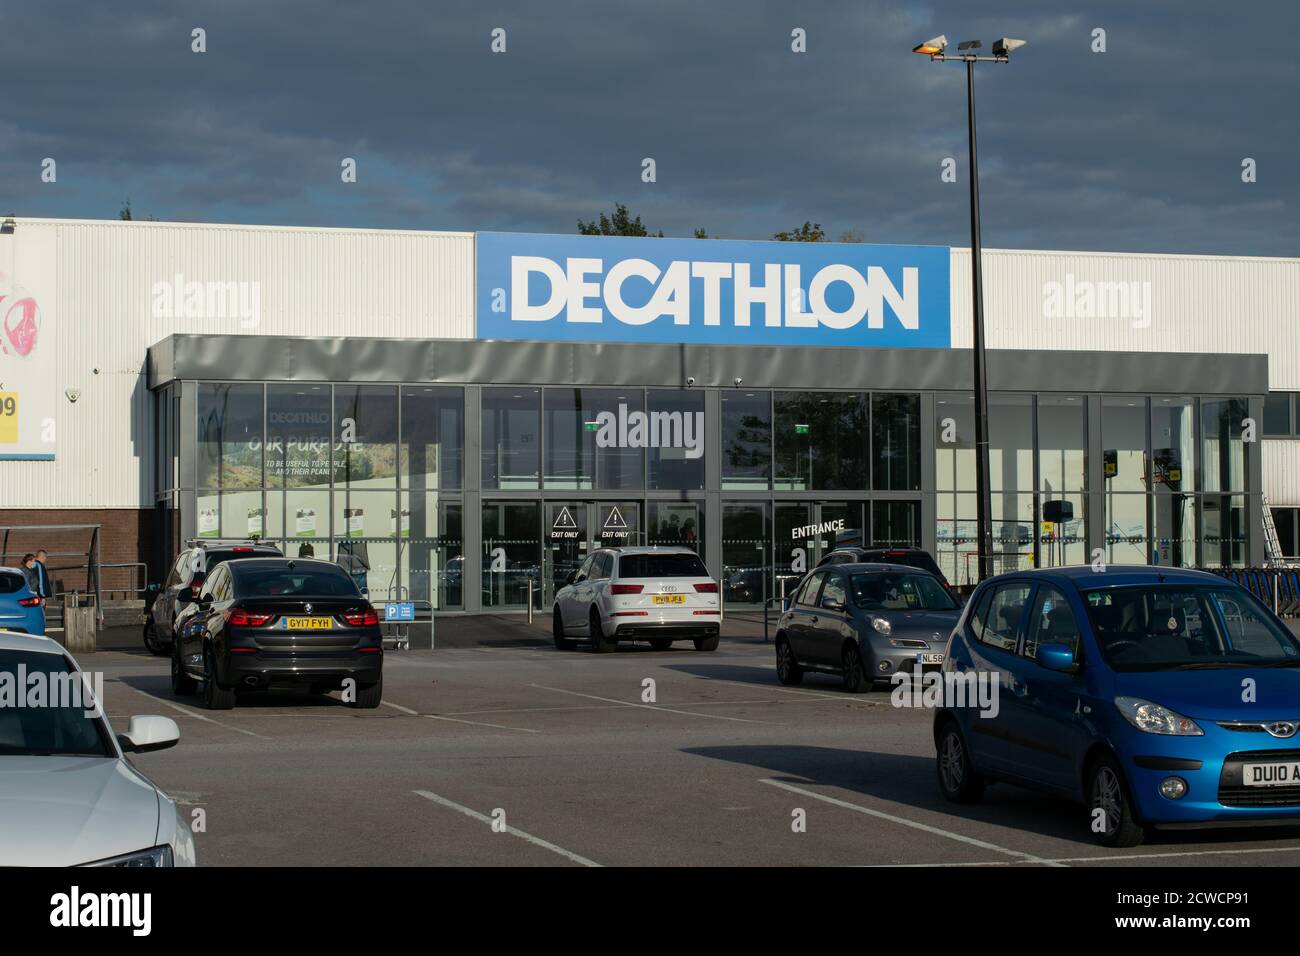 Decathlon sports retailer store with parked cars, Stockport, UK Stock Photo